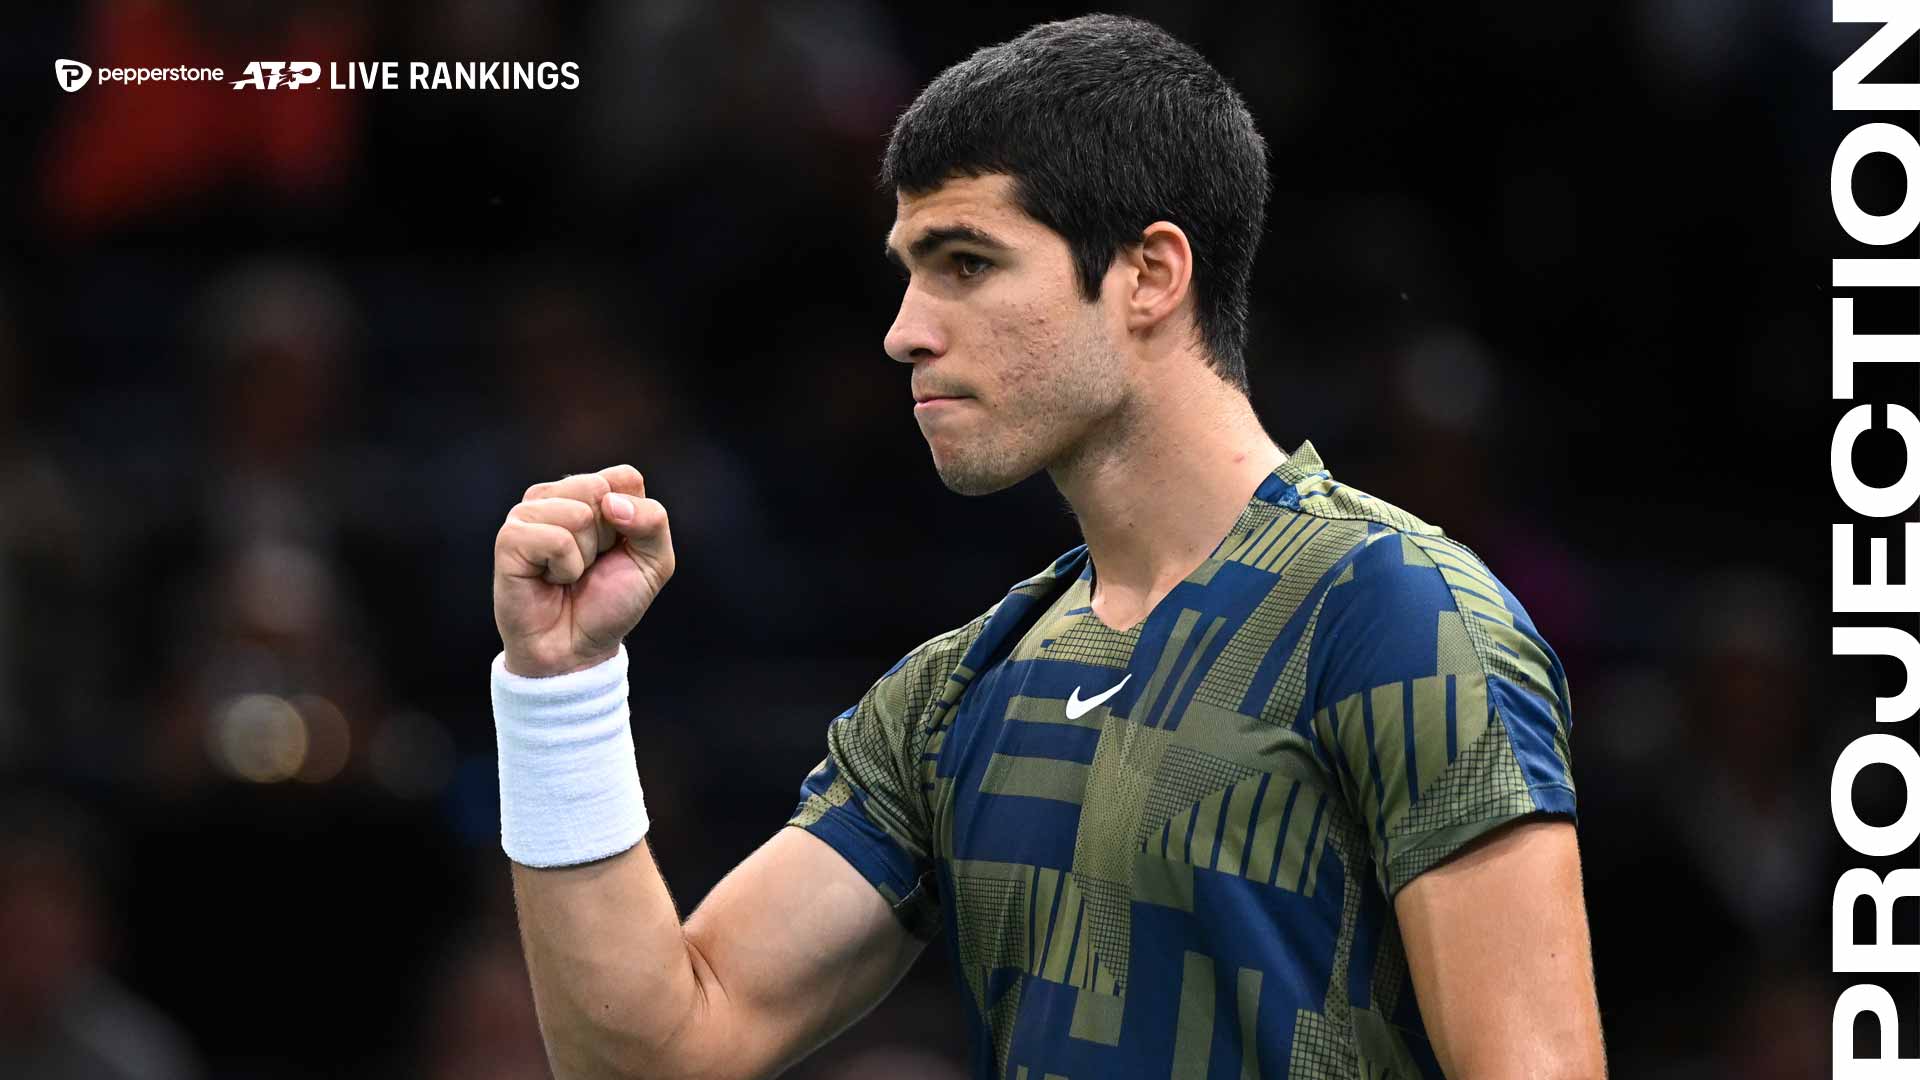 Carlos Alcaraz became the youngest No. 1 in the history of the Pepperstone ATP Rankings last year.